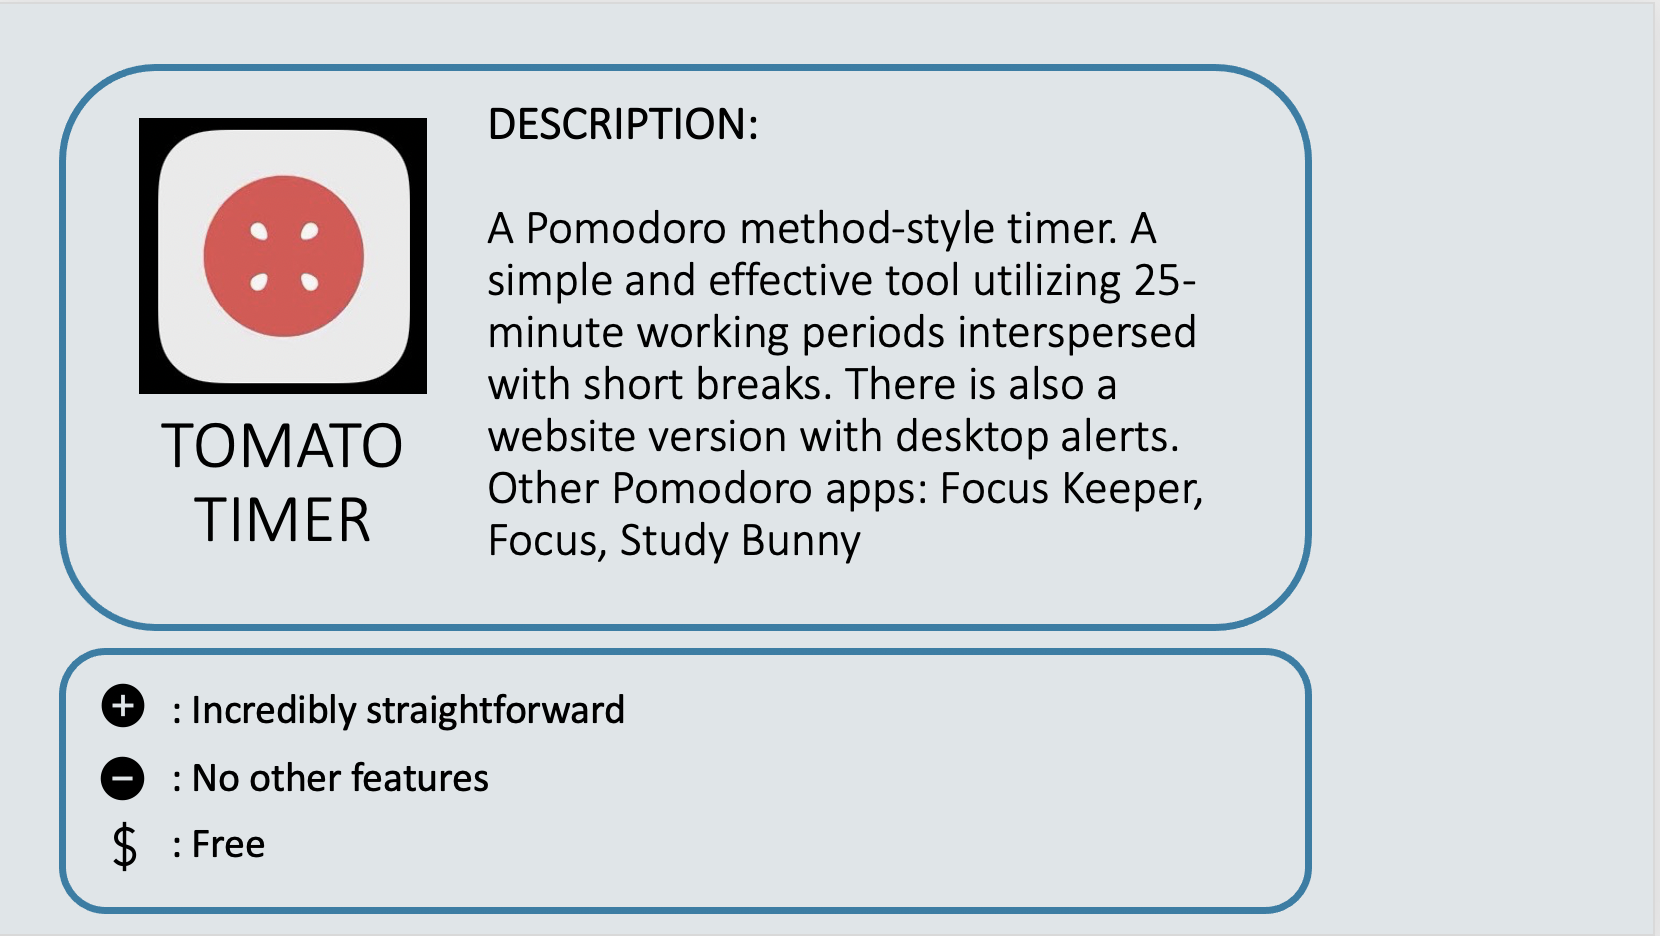 TOMATO TIMER - A Pomodoro method-style timer. A simple and effective tool utilizing 25-minute working periods interspersed with short breaks. There is also a website version with desktop alerts. Other Pomodoro apps: Focus Keeper, Focus, Study Bunny. Positive: Incredibly straightforward. Negative: No other features. Cost: Free.